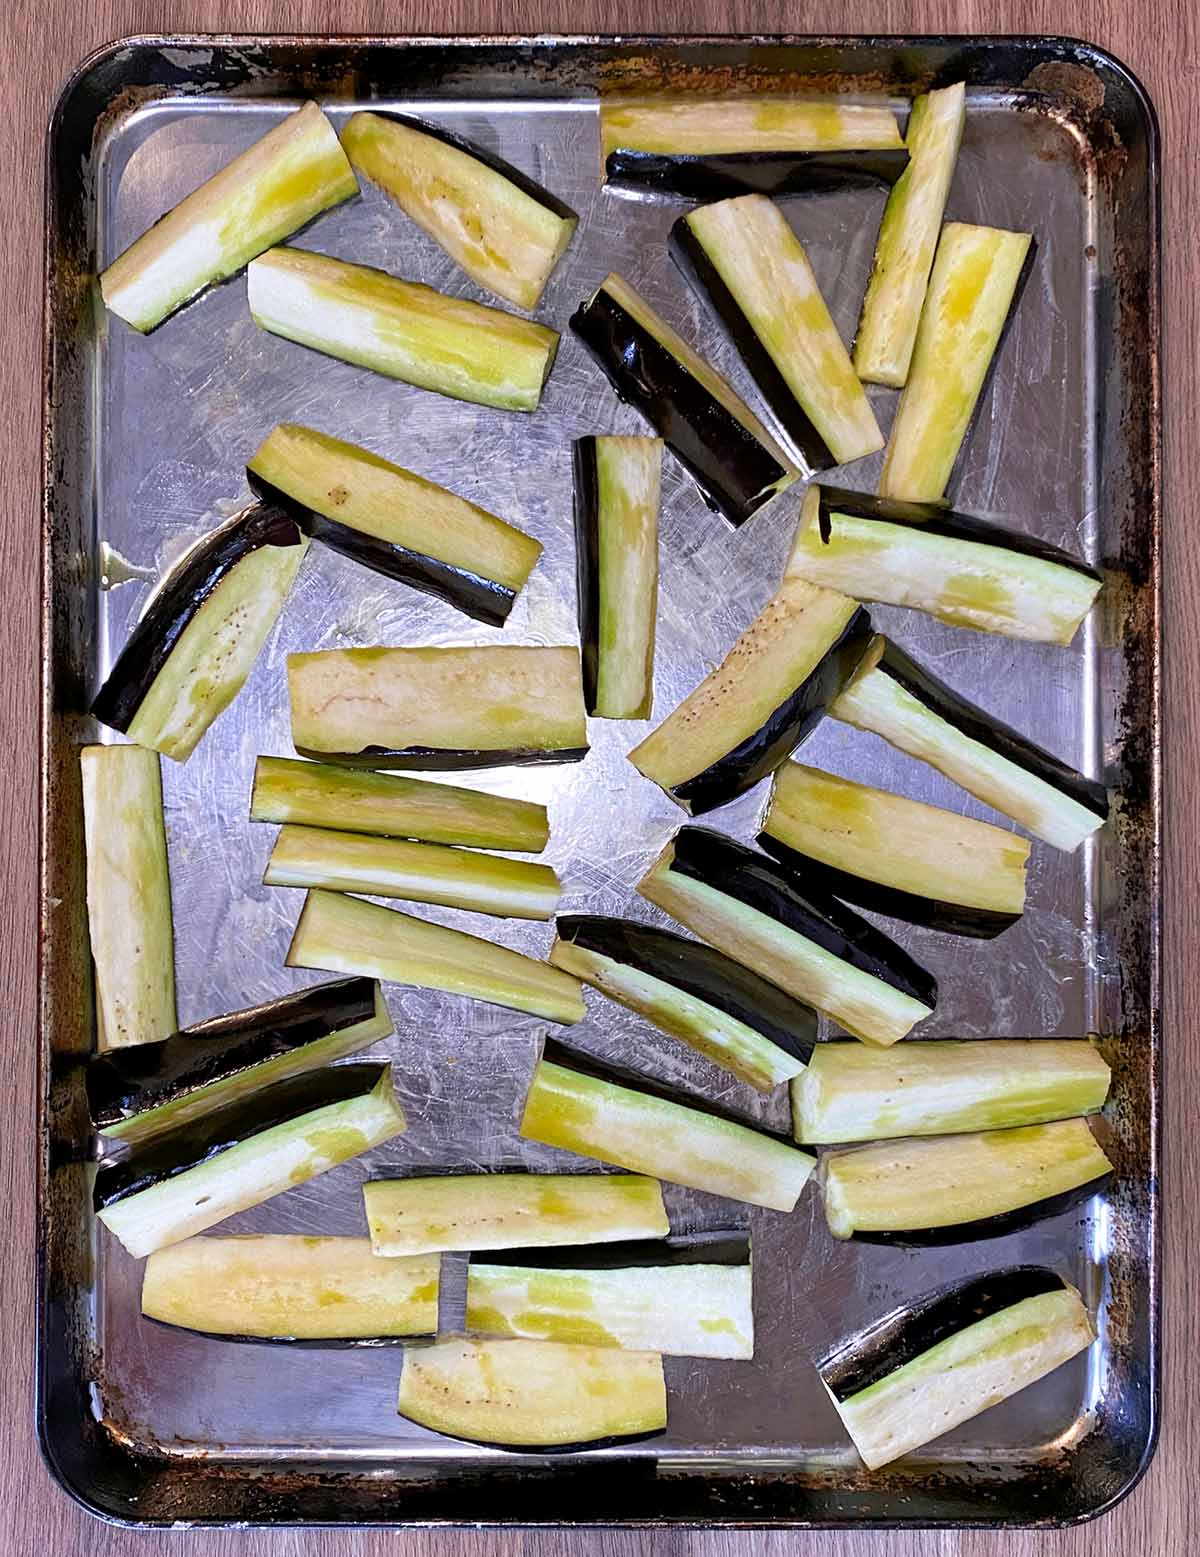 Wedges of aubergine drizzled with oil on a baking tray.